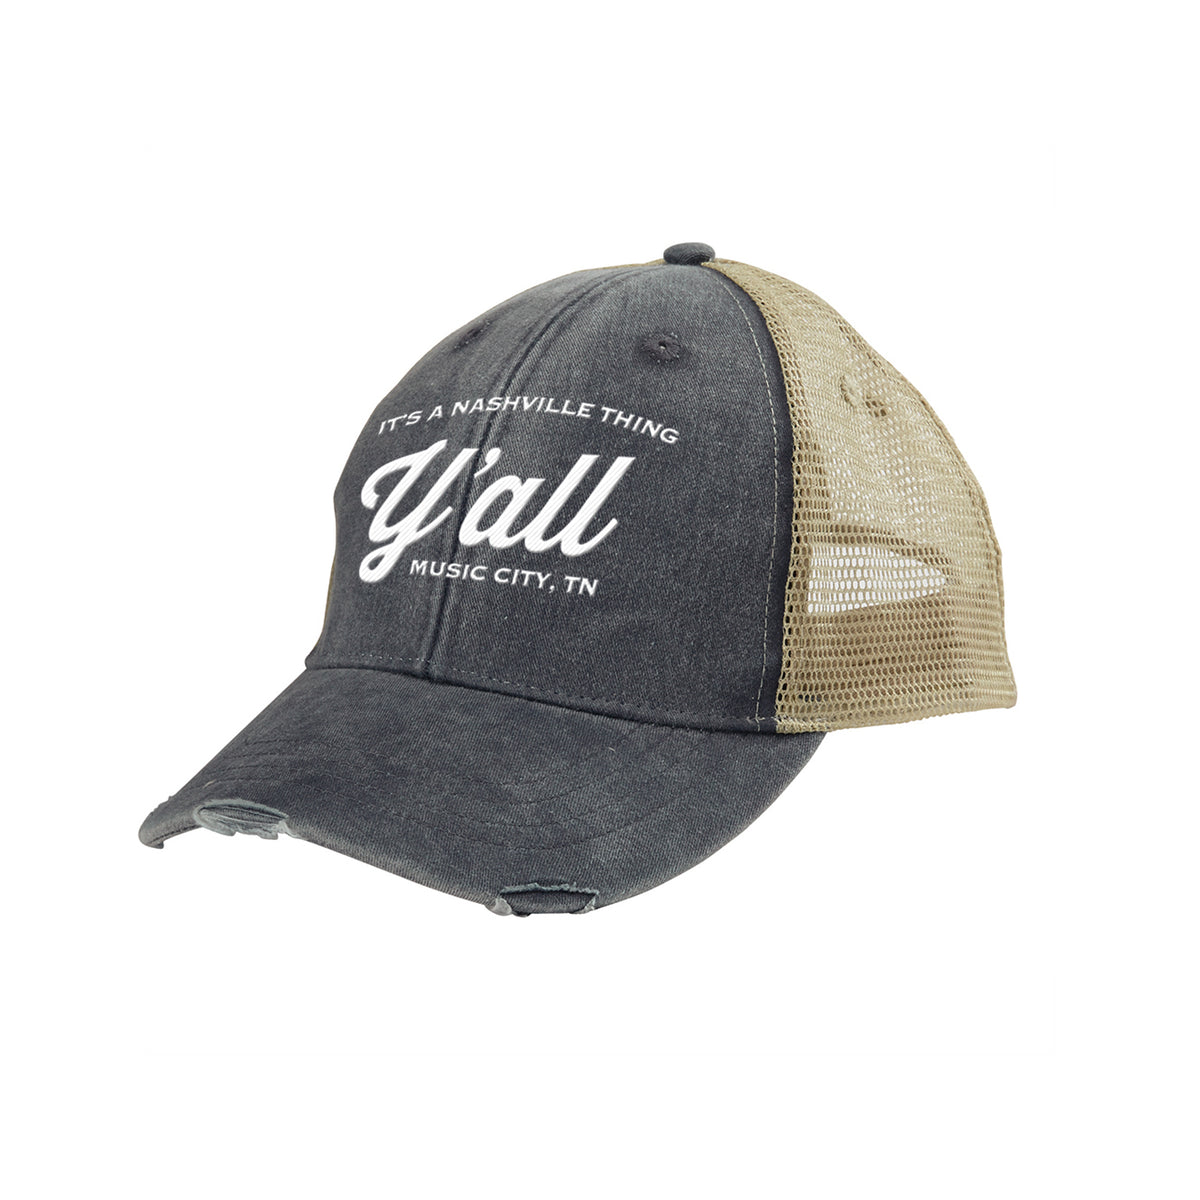 Y'all Trucker's Hat– It's A Nashville Thing Y'all